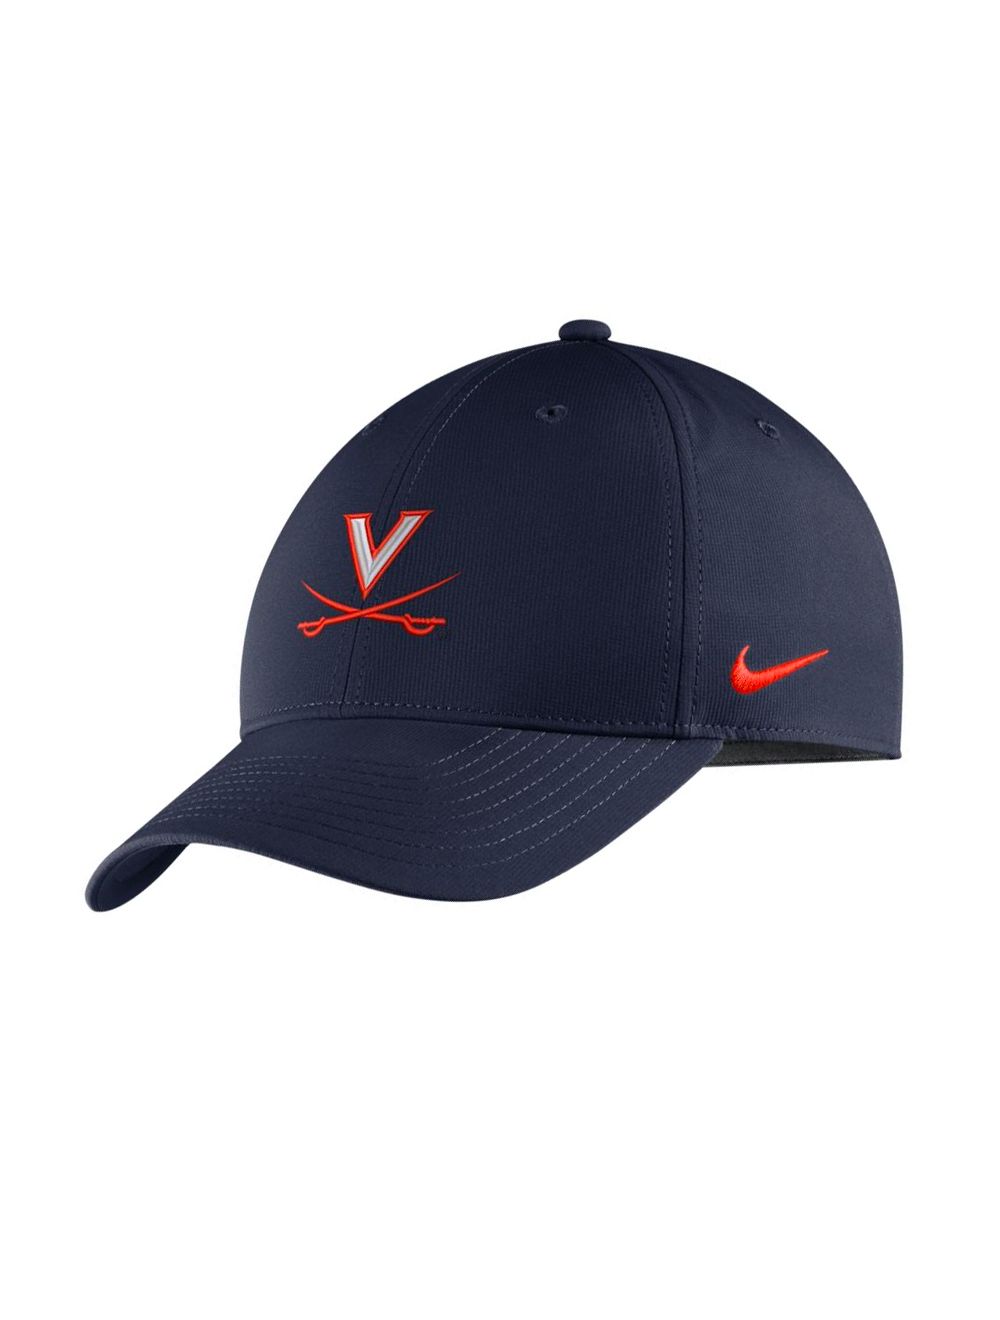 Nike Navy Legacy91 Hat - Mincer's of Charlottesville